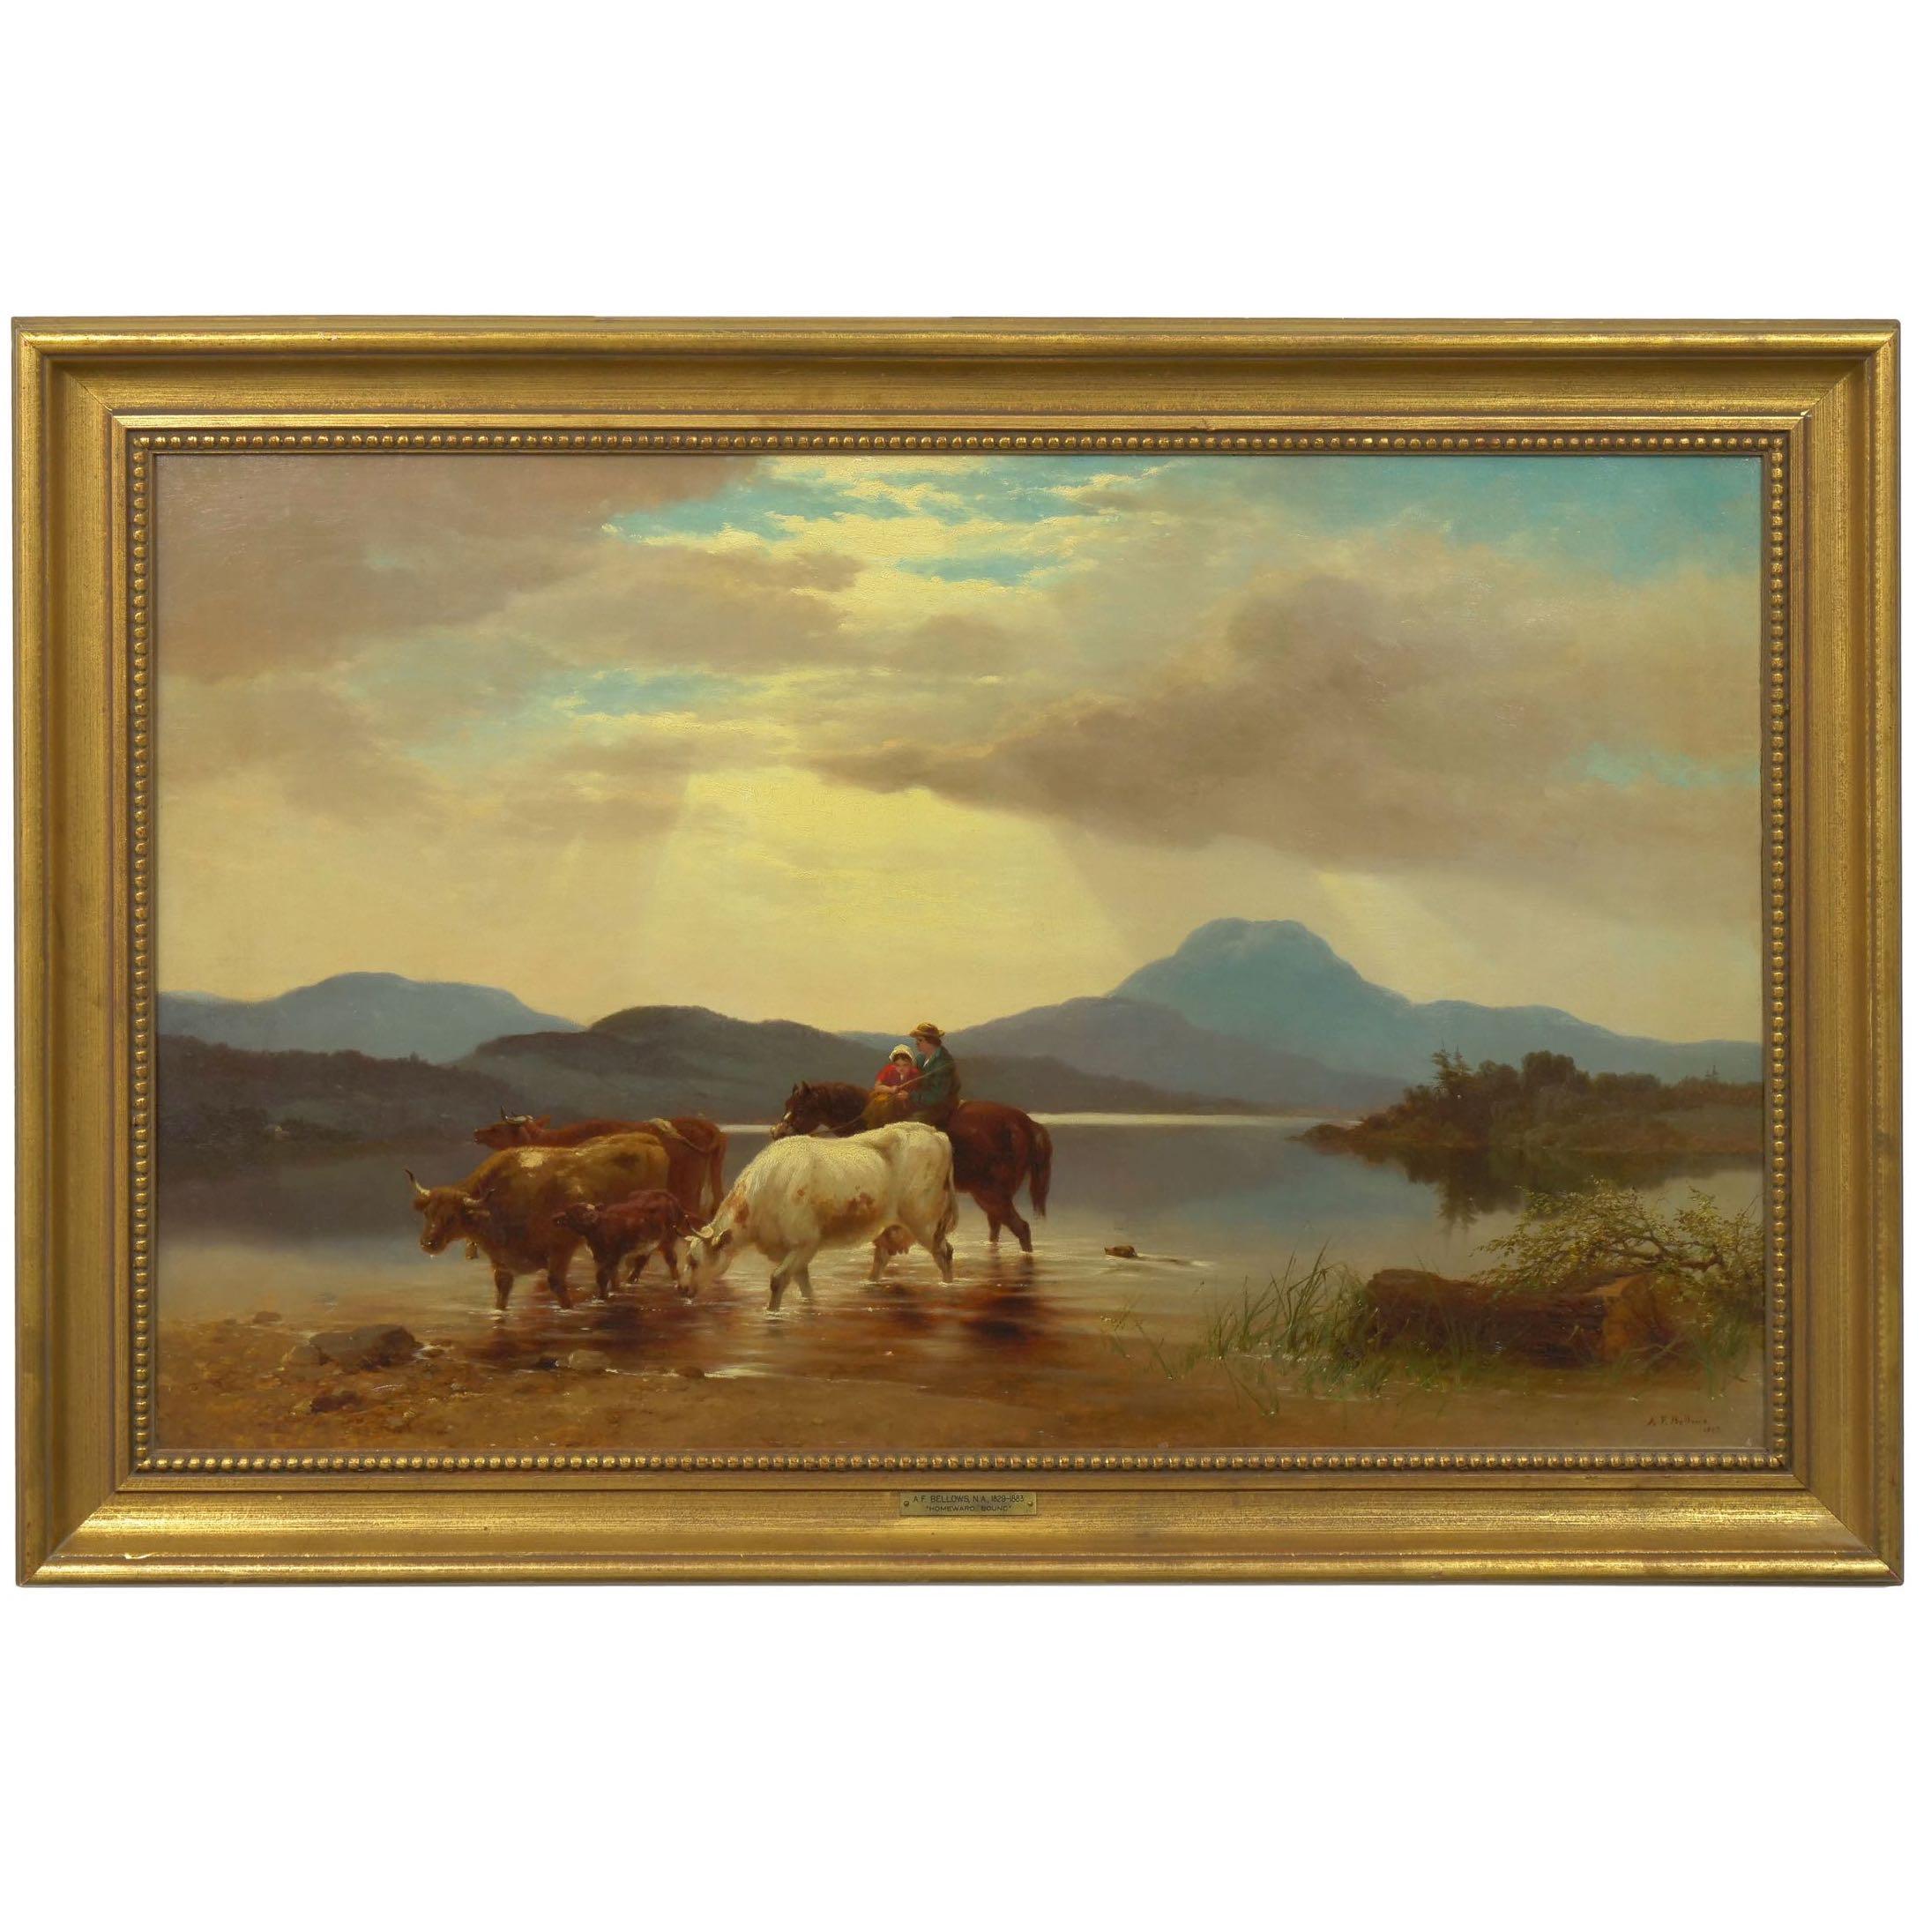 A bucolic scene rich with color, this landscape depicts a farmer with his young daughter crossing the waters behind their cattle. The water is nearly perfectly still and everything about the scene exudes a sense of peacefulness and quiet as the rays